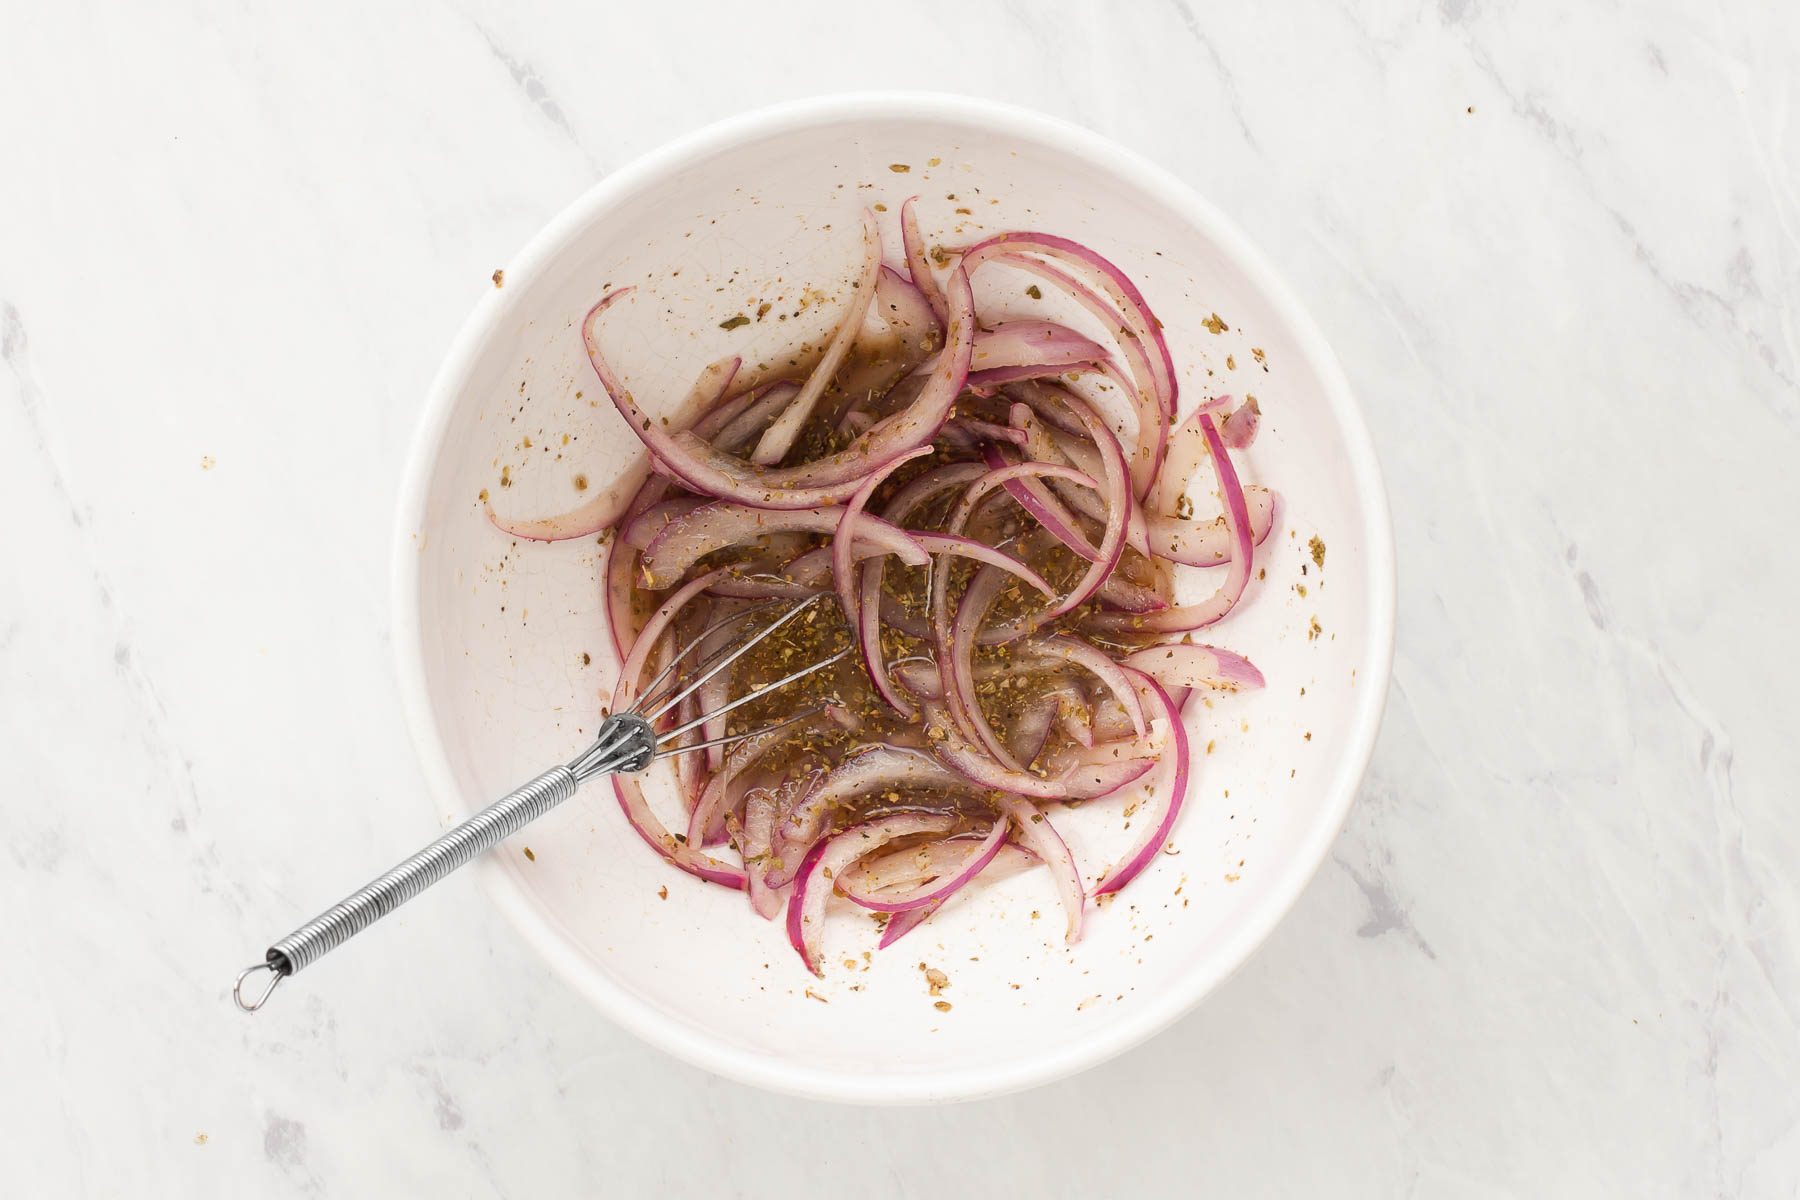 Red onions in marinade.